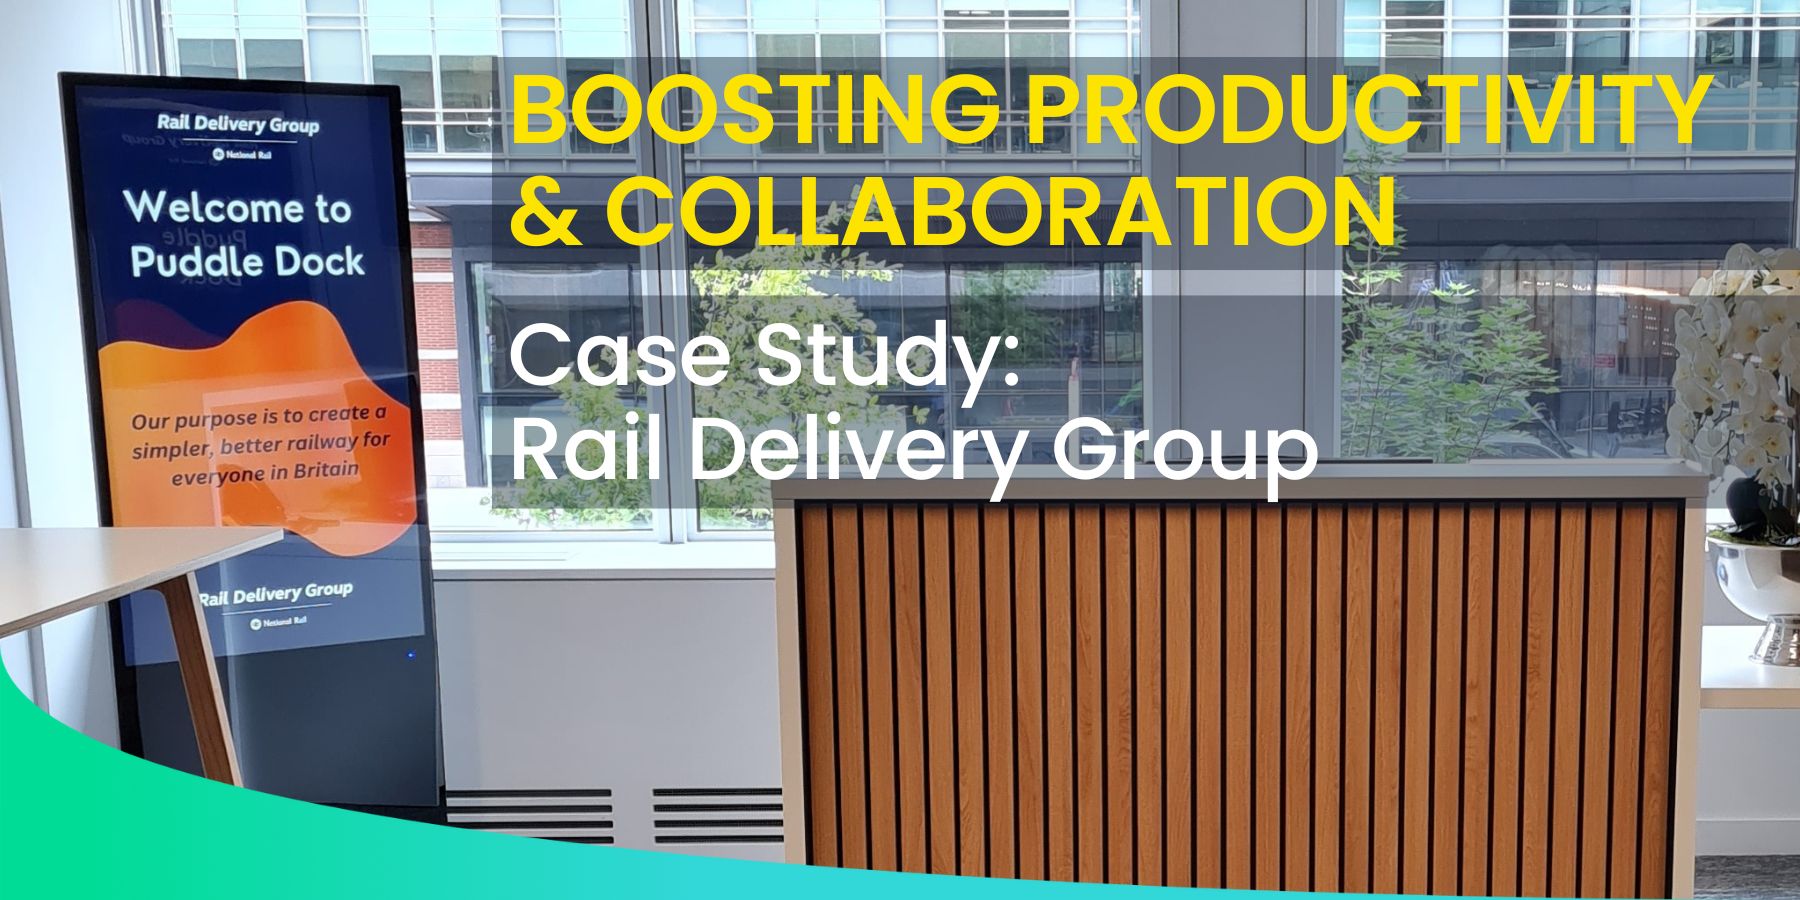 Featured image for “Boosting Productivity & Collaboration: A Client Case Study”